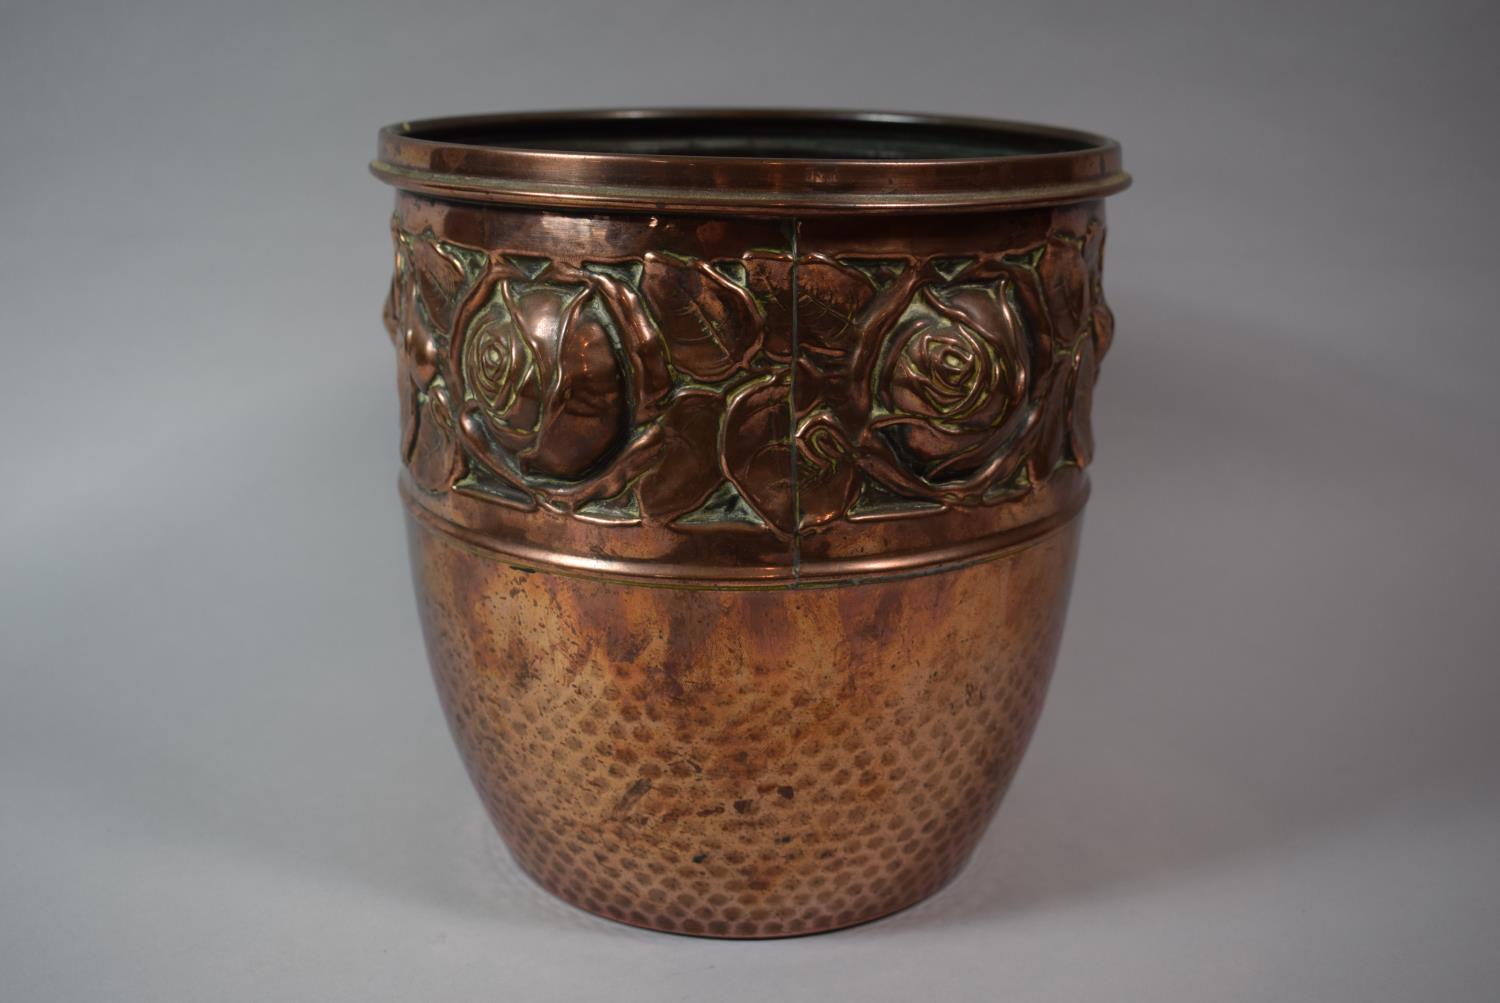 A Hand Beaten Copper Jardiniere with Floral Decoration in Relief, 20cm Diameter